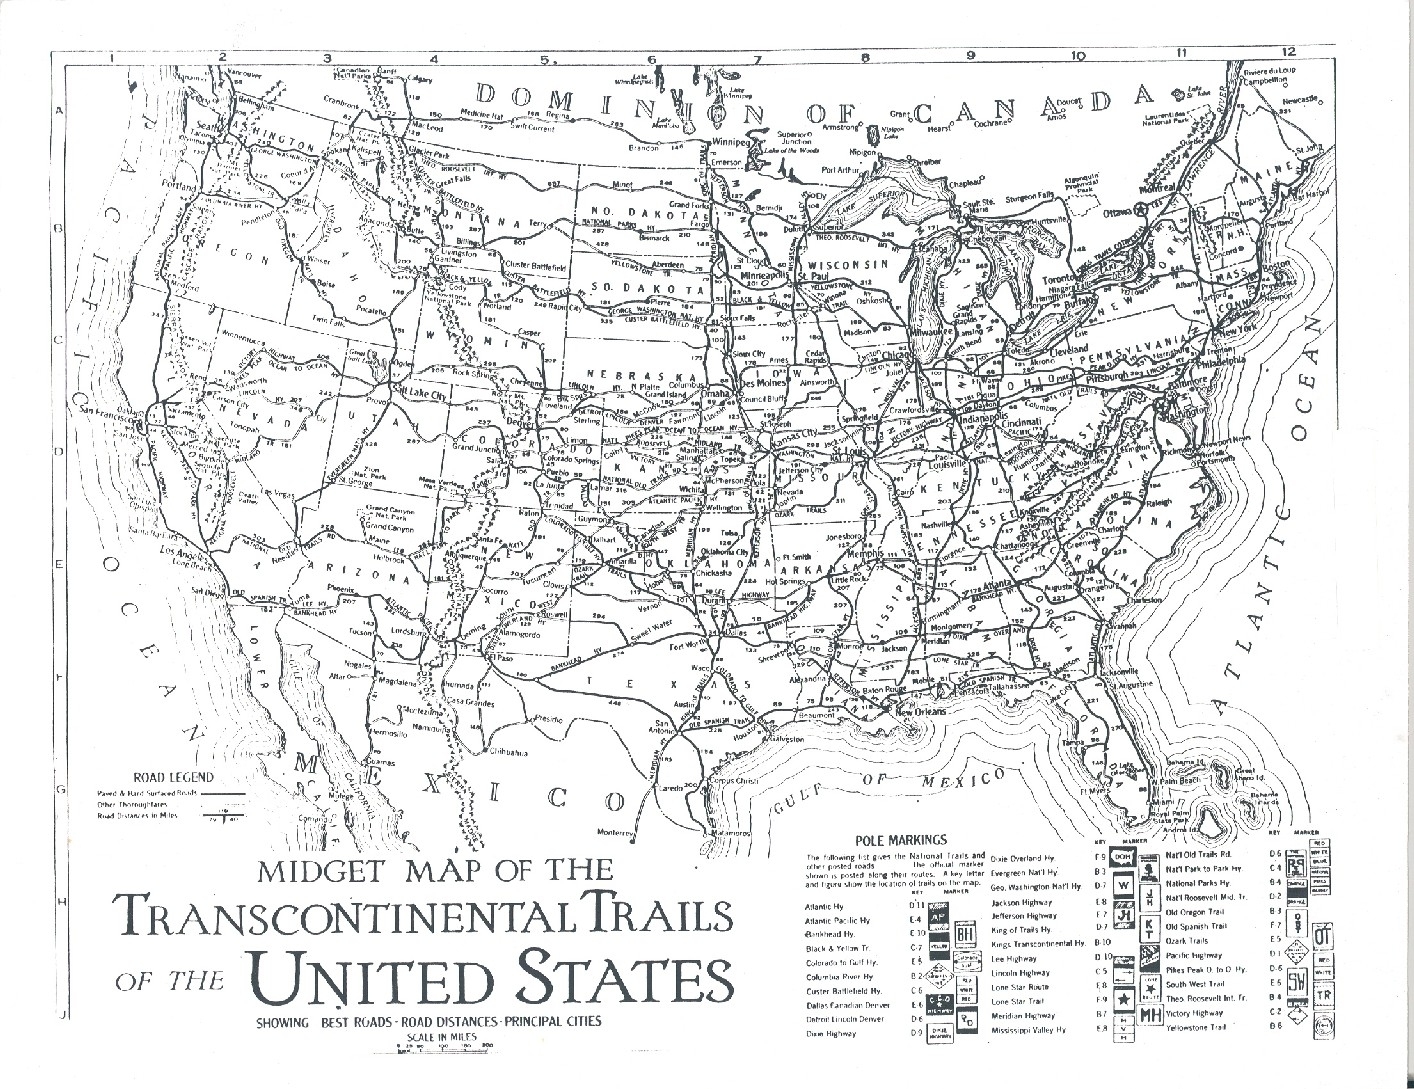 Midget Map of the Transcontental Trails of the United States showing best roads, rode distances, and principal cities